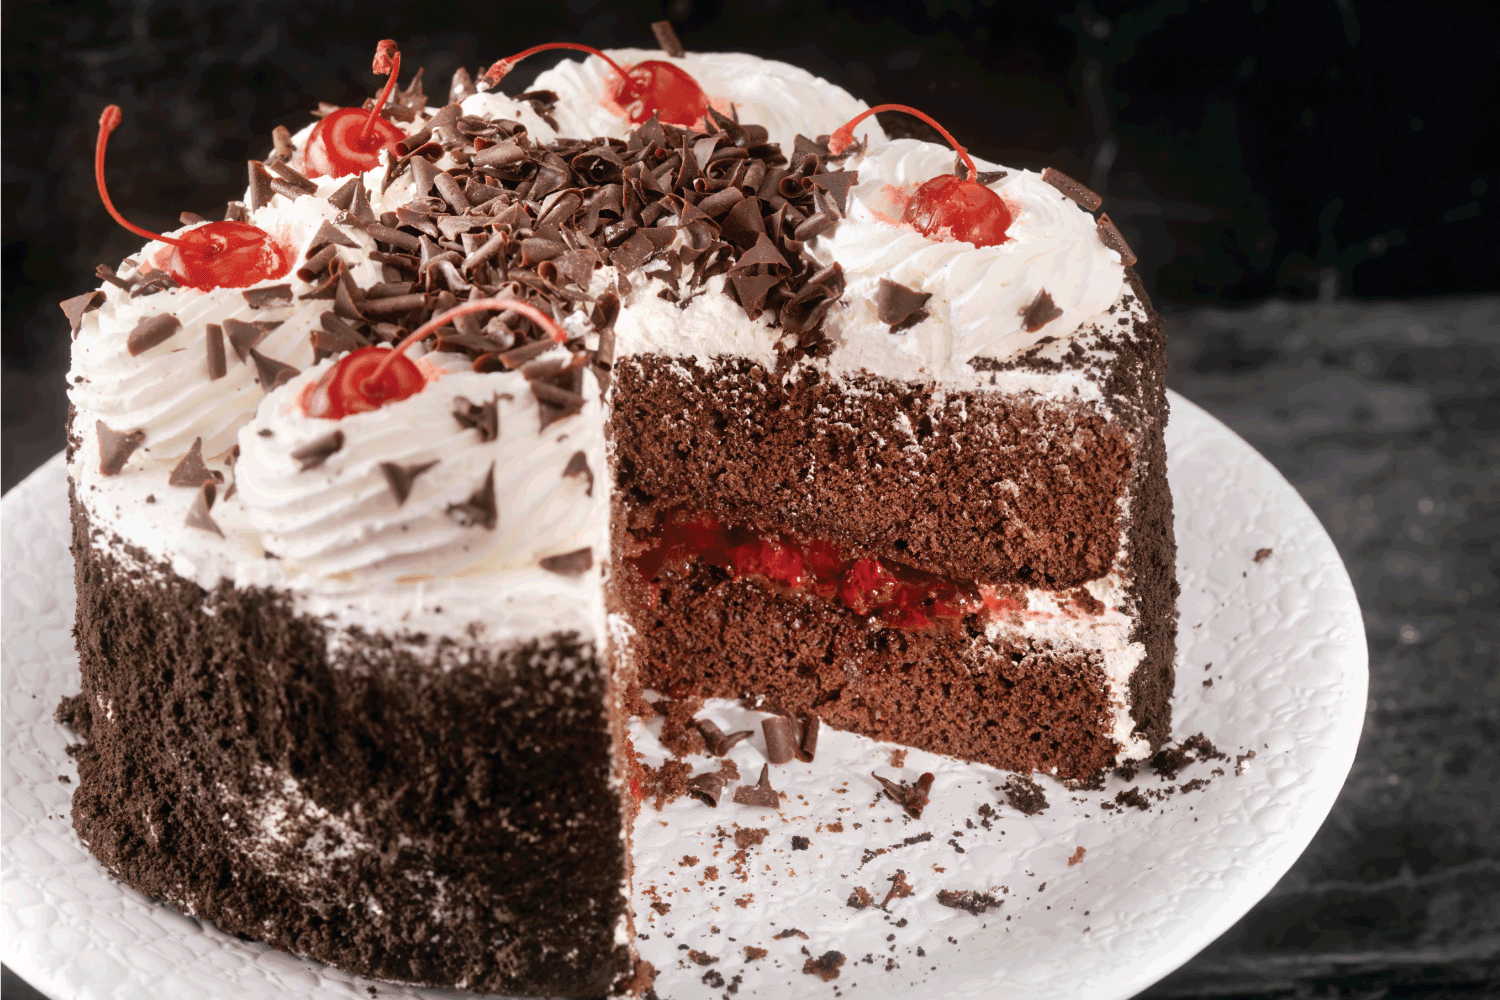 Black Forest Cake with cherries